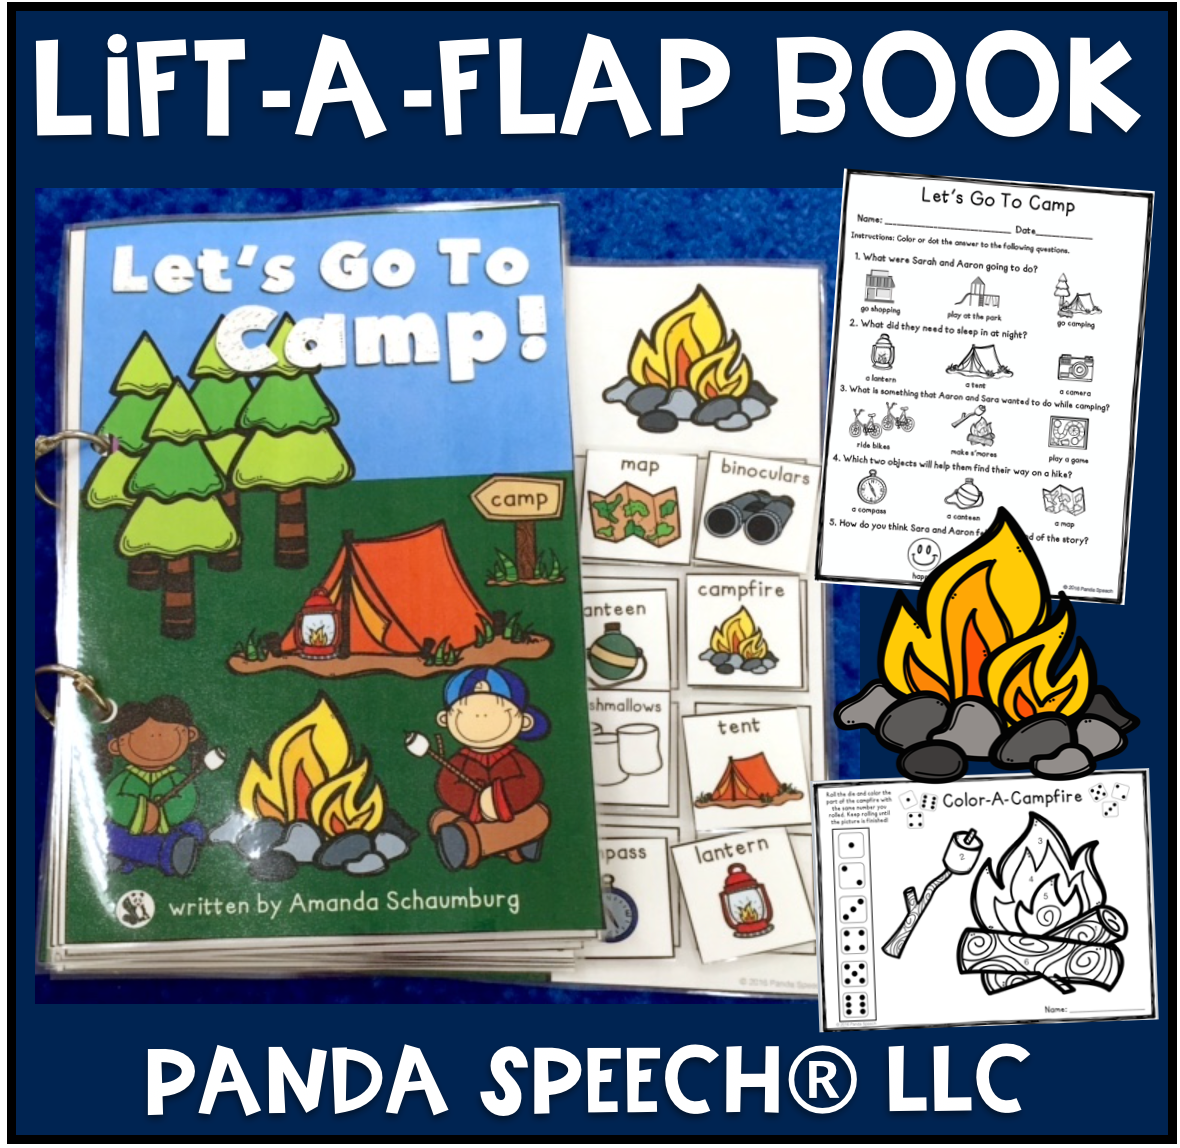 Let's go to Camp! Lift a Flap Book (Print & Make Book)